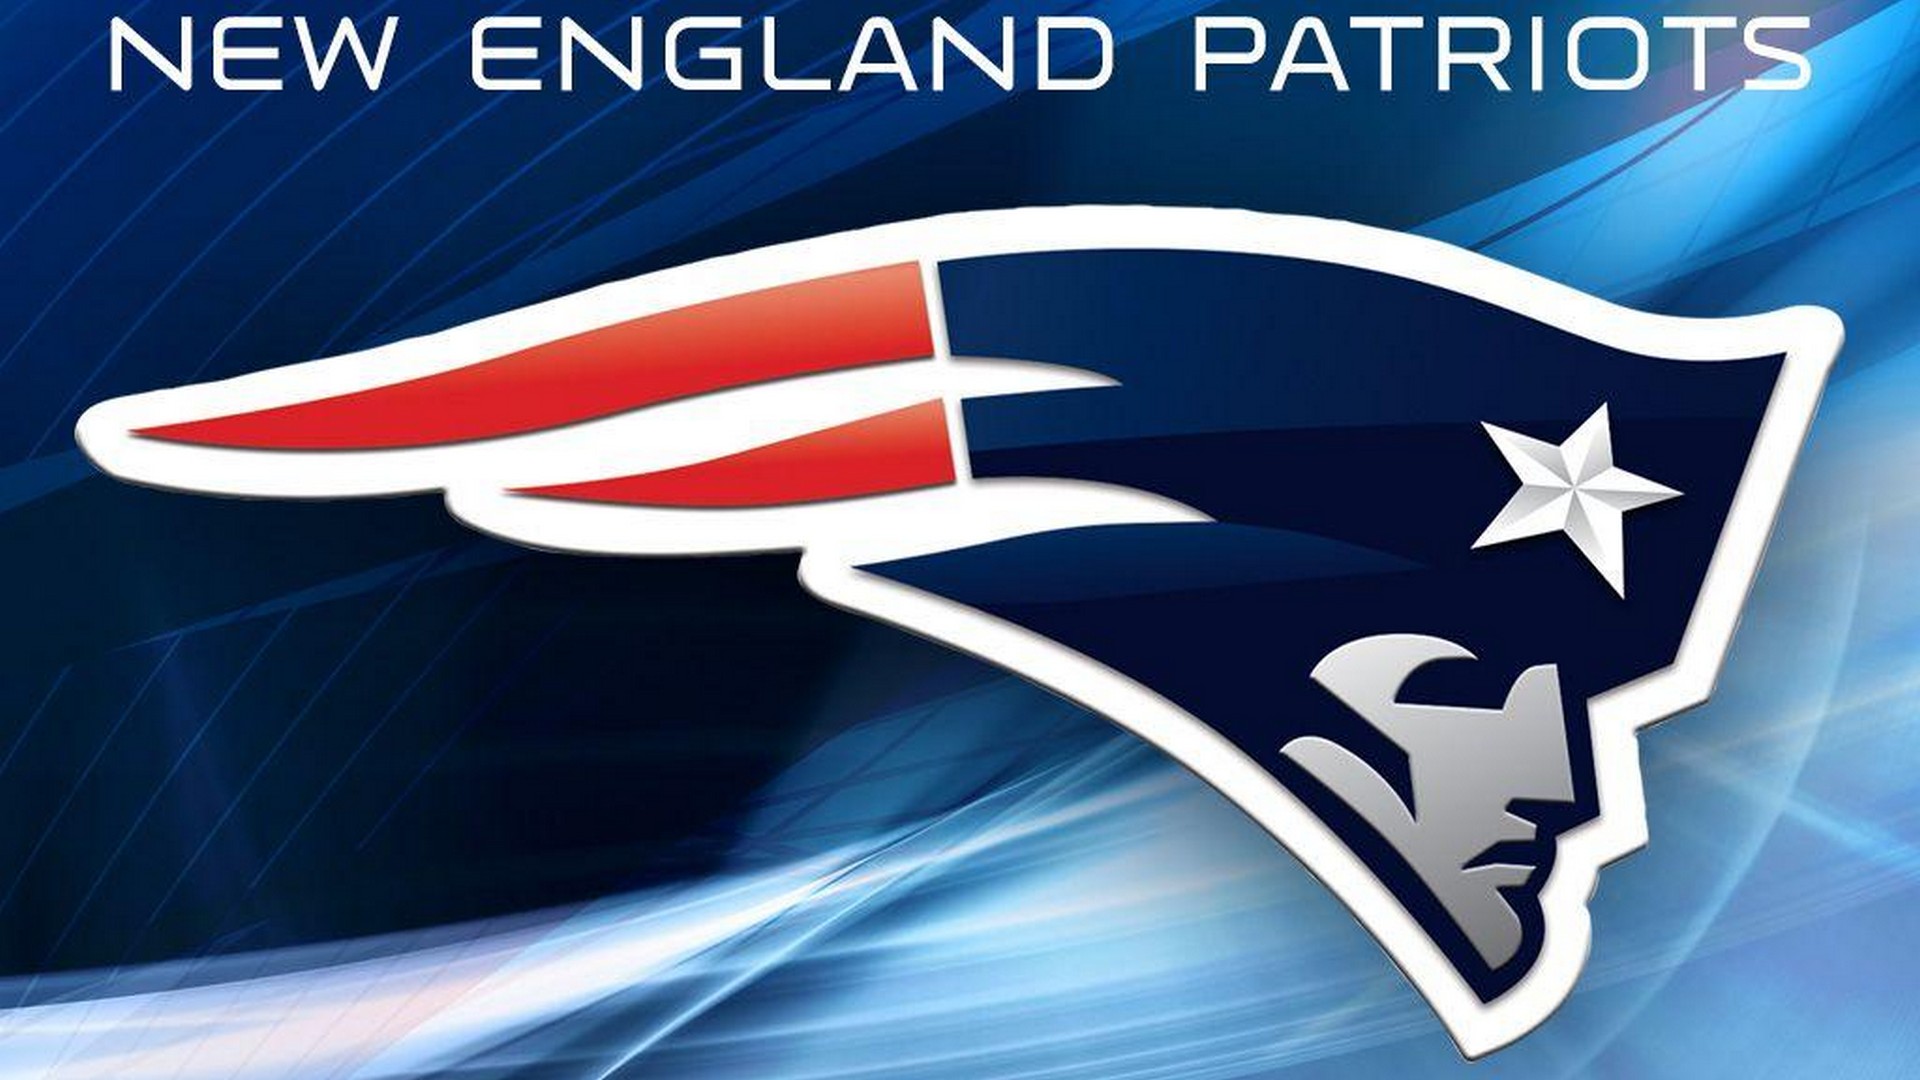 New England Patriots Wallpaper in HD With high-resolution 1920X1080 pixel. Download and set as wallpaper for Desktop Computer, Apple iPhone X, XS Max, XR, 8, 7, 6, SE, iPad, Android